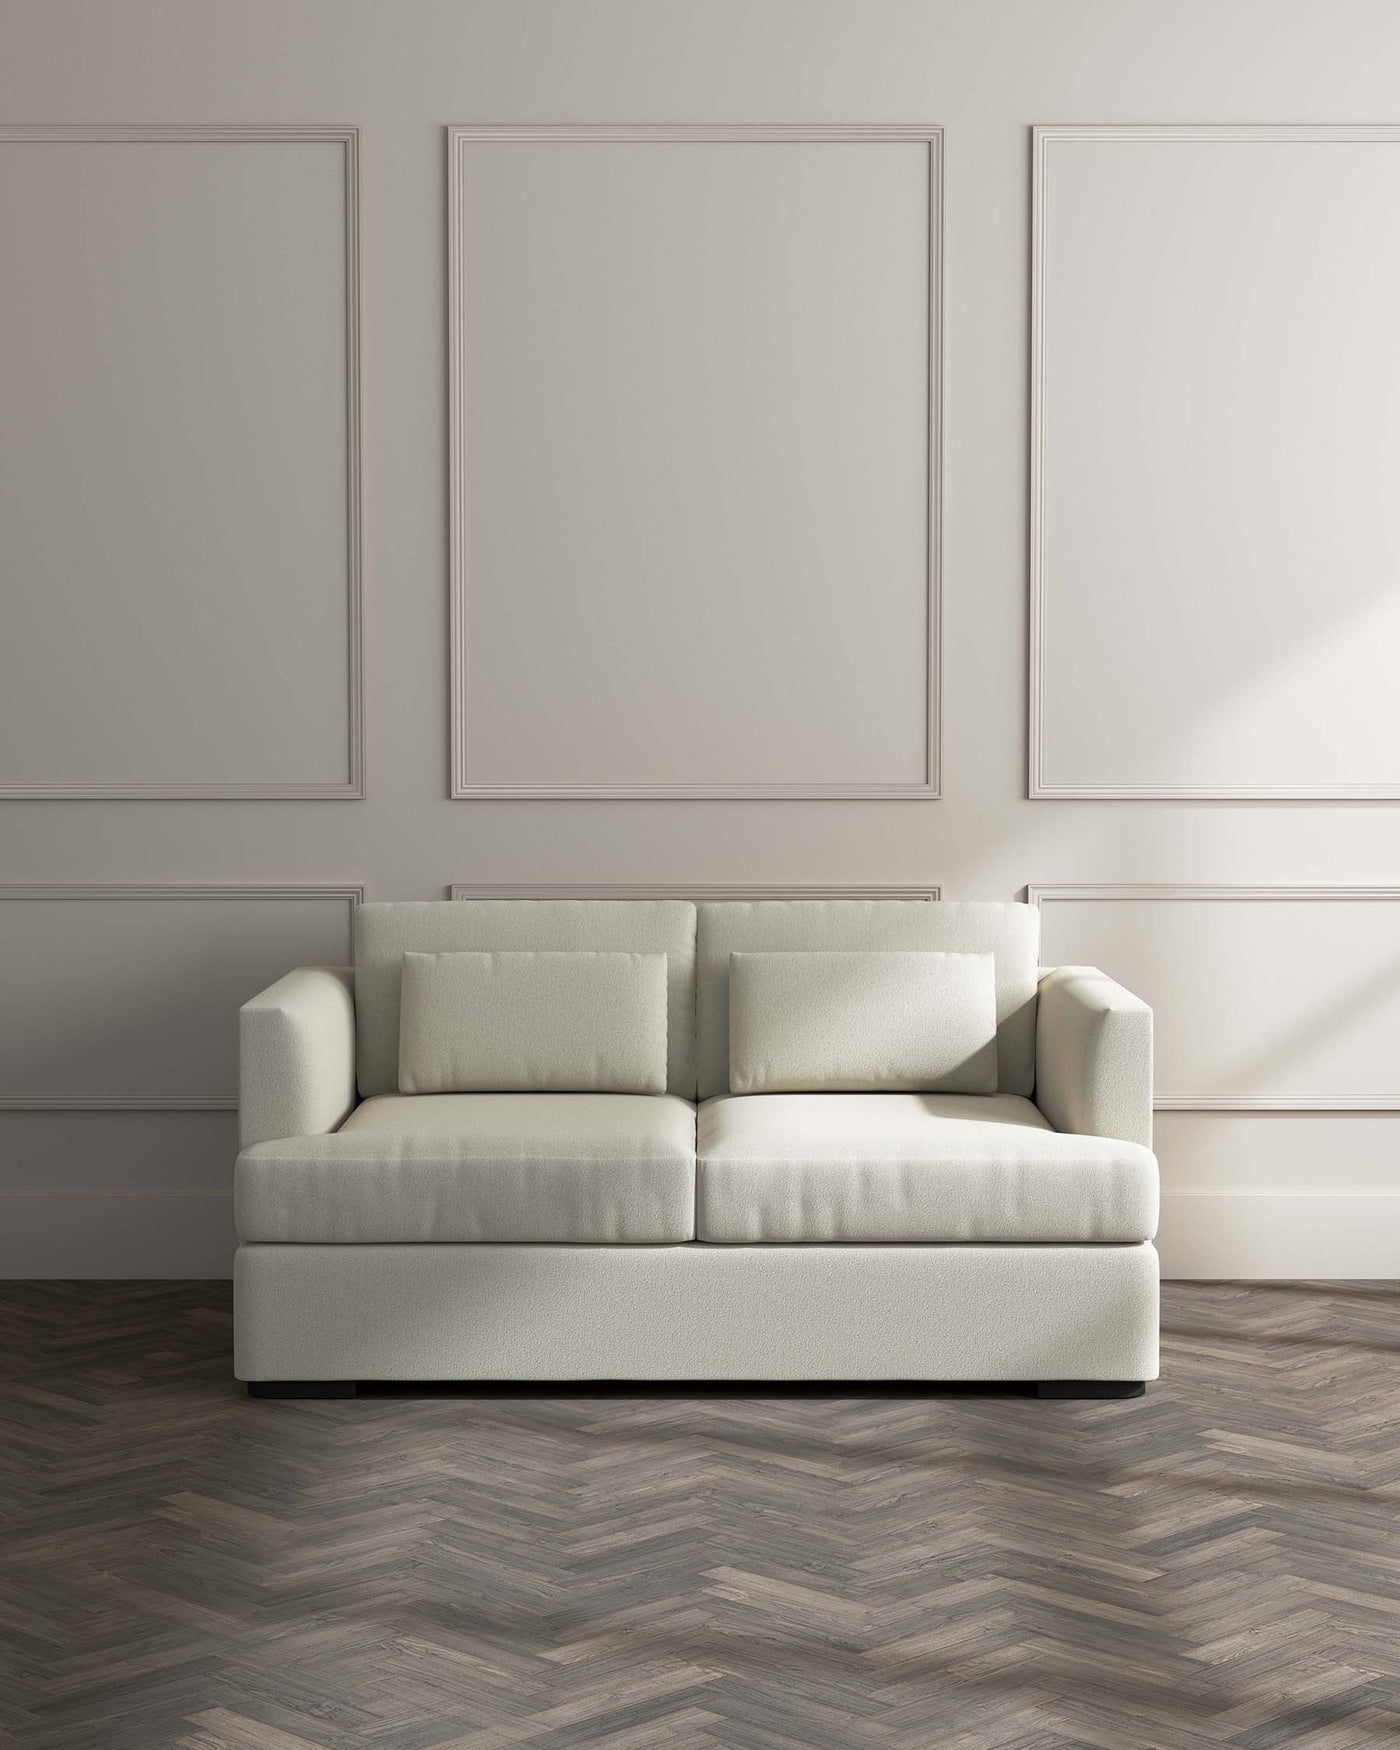 Modern minimalist off-white three-seater sofa with clean lines and plush cushions, set against a neutral wall with decorative mouldings and dark herringbone-patterned wood flooring.